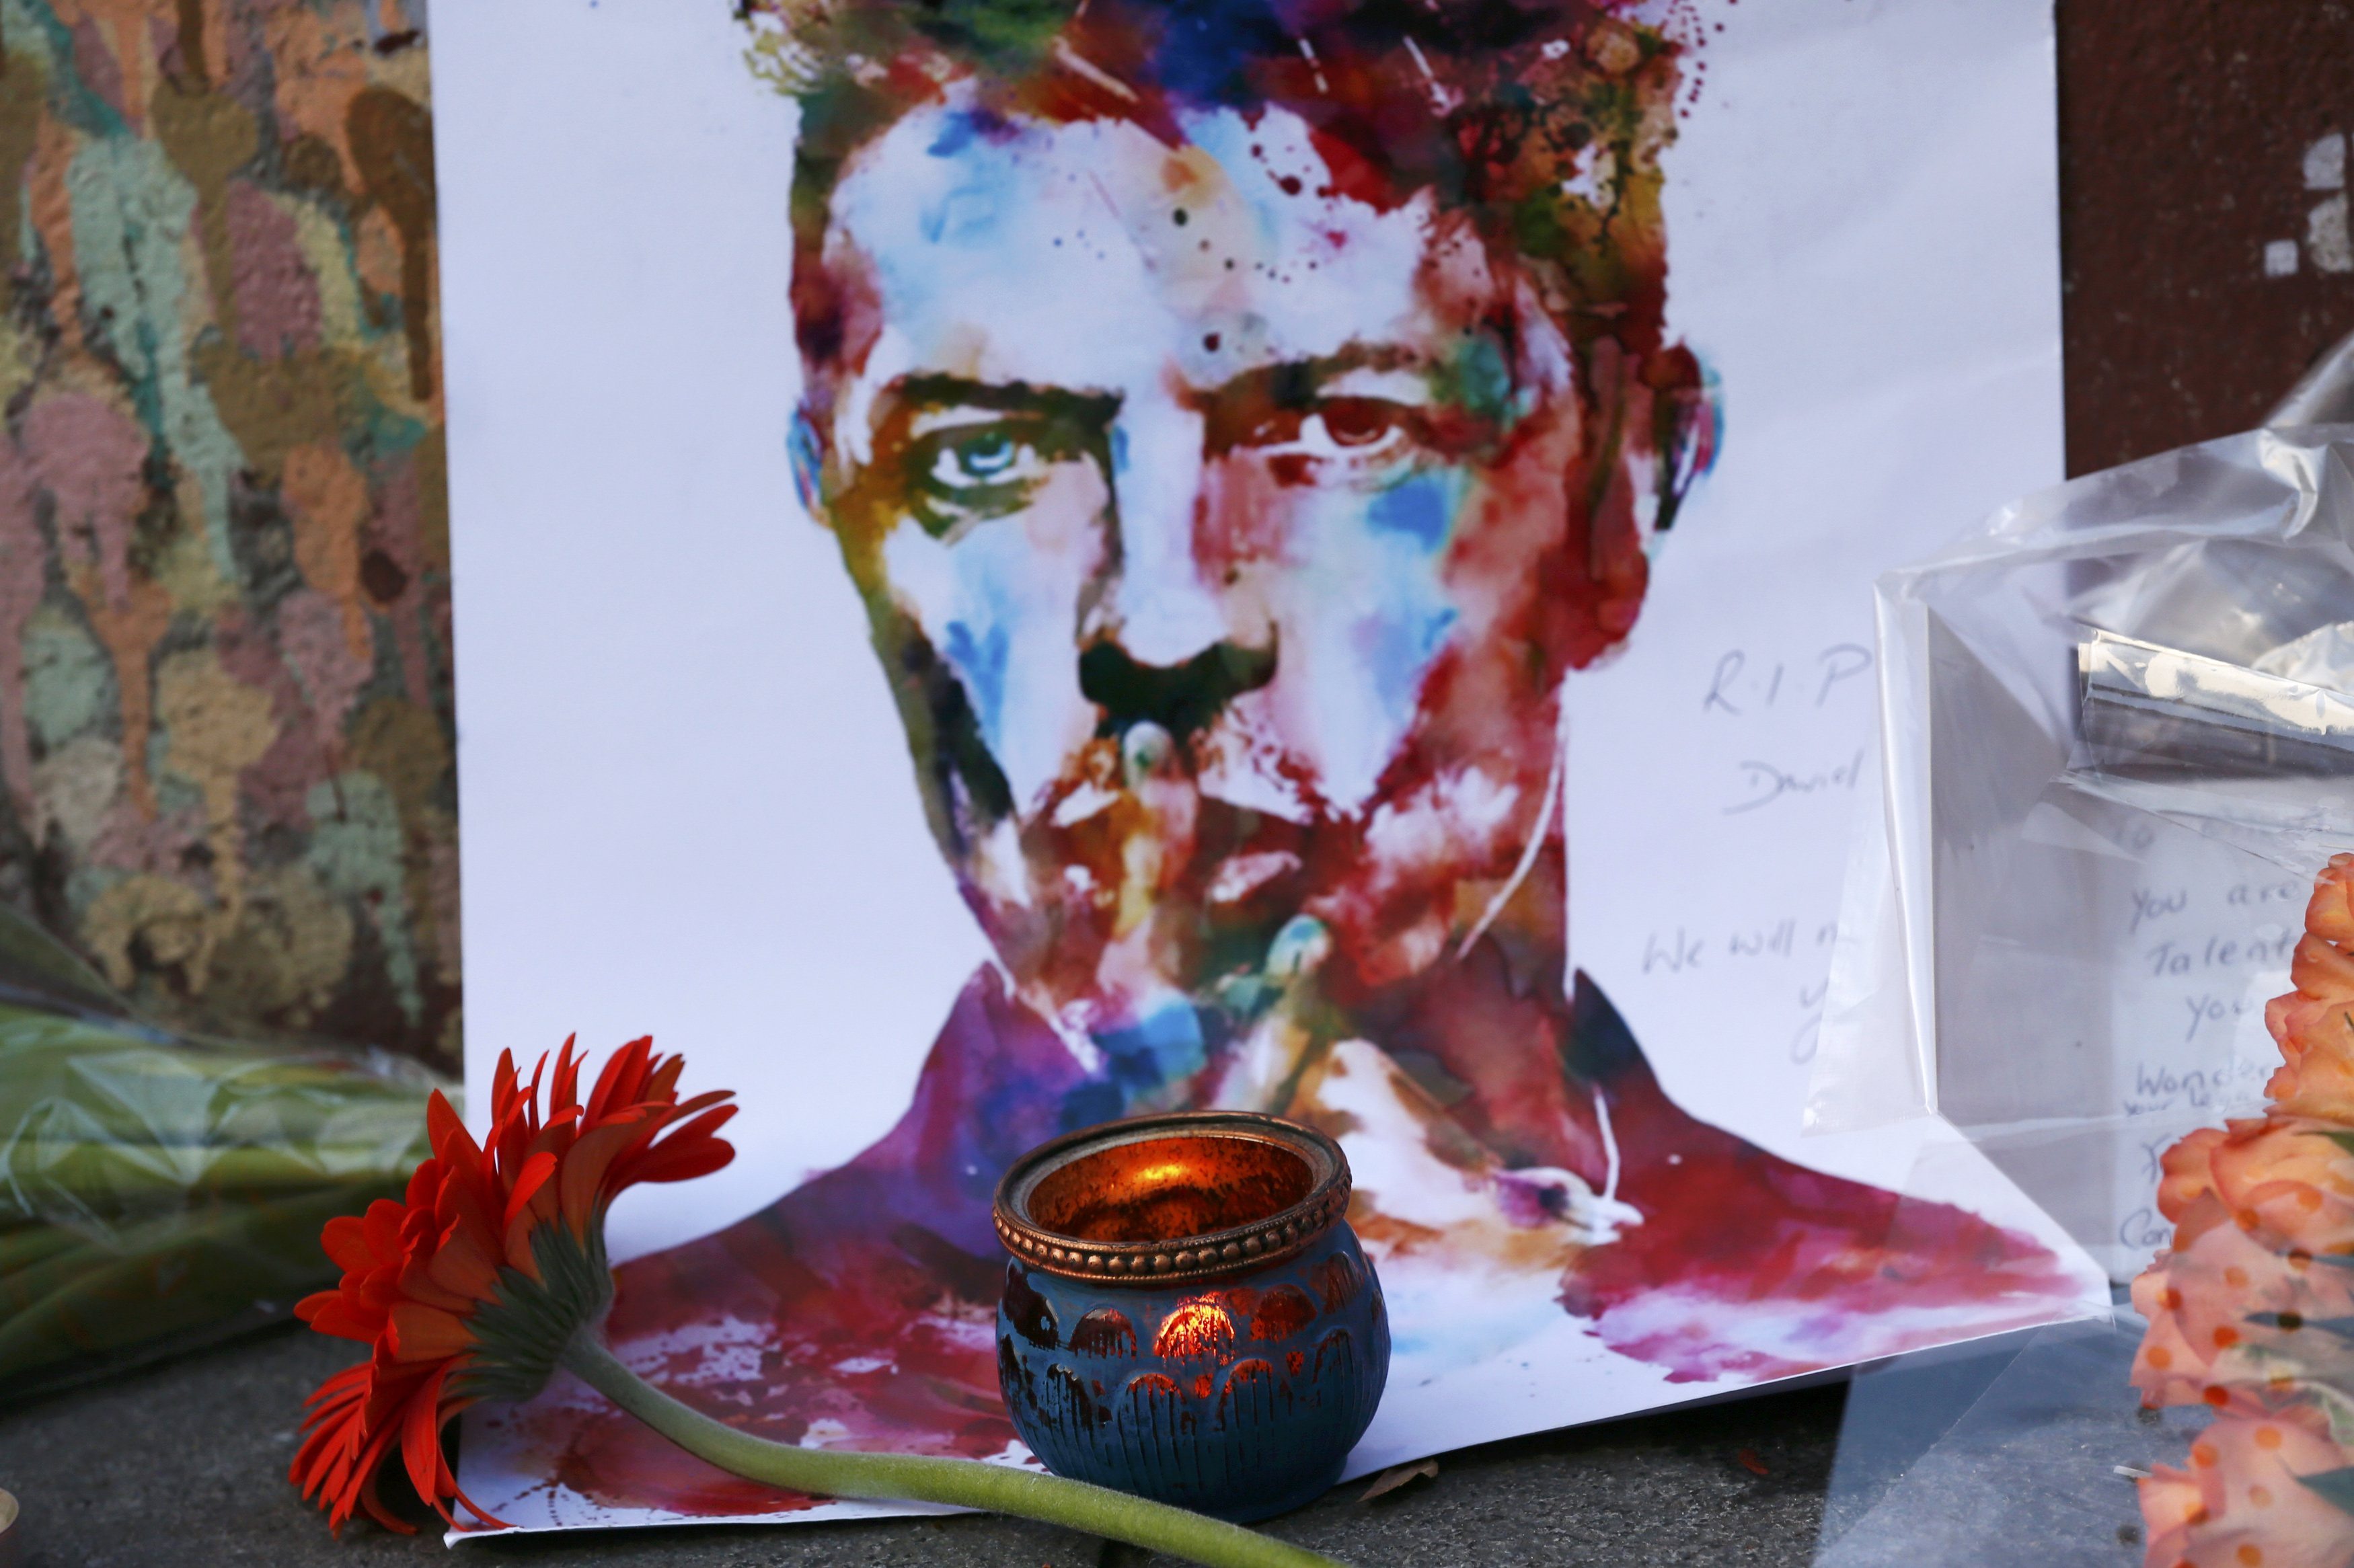 Tributes are seen next to a mural of David Bowie in Brixton, south London, January 11, 2016. David Bowie, a music legend who used daringly androgynous displays of sexuality and glittering costumes to frame legendary rock hits "Ziggy Stardust" and "Space Oddity", has died of cancer. REUTERS/Stefan Wermuth